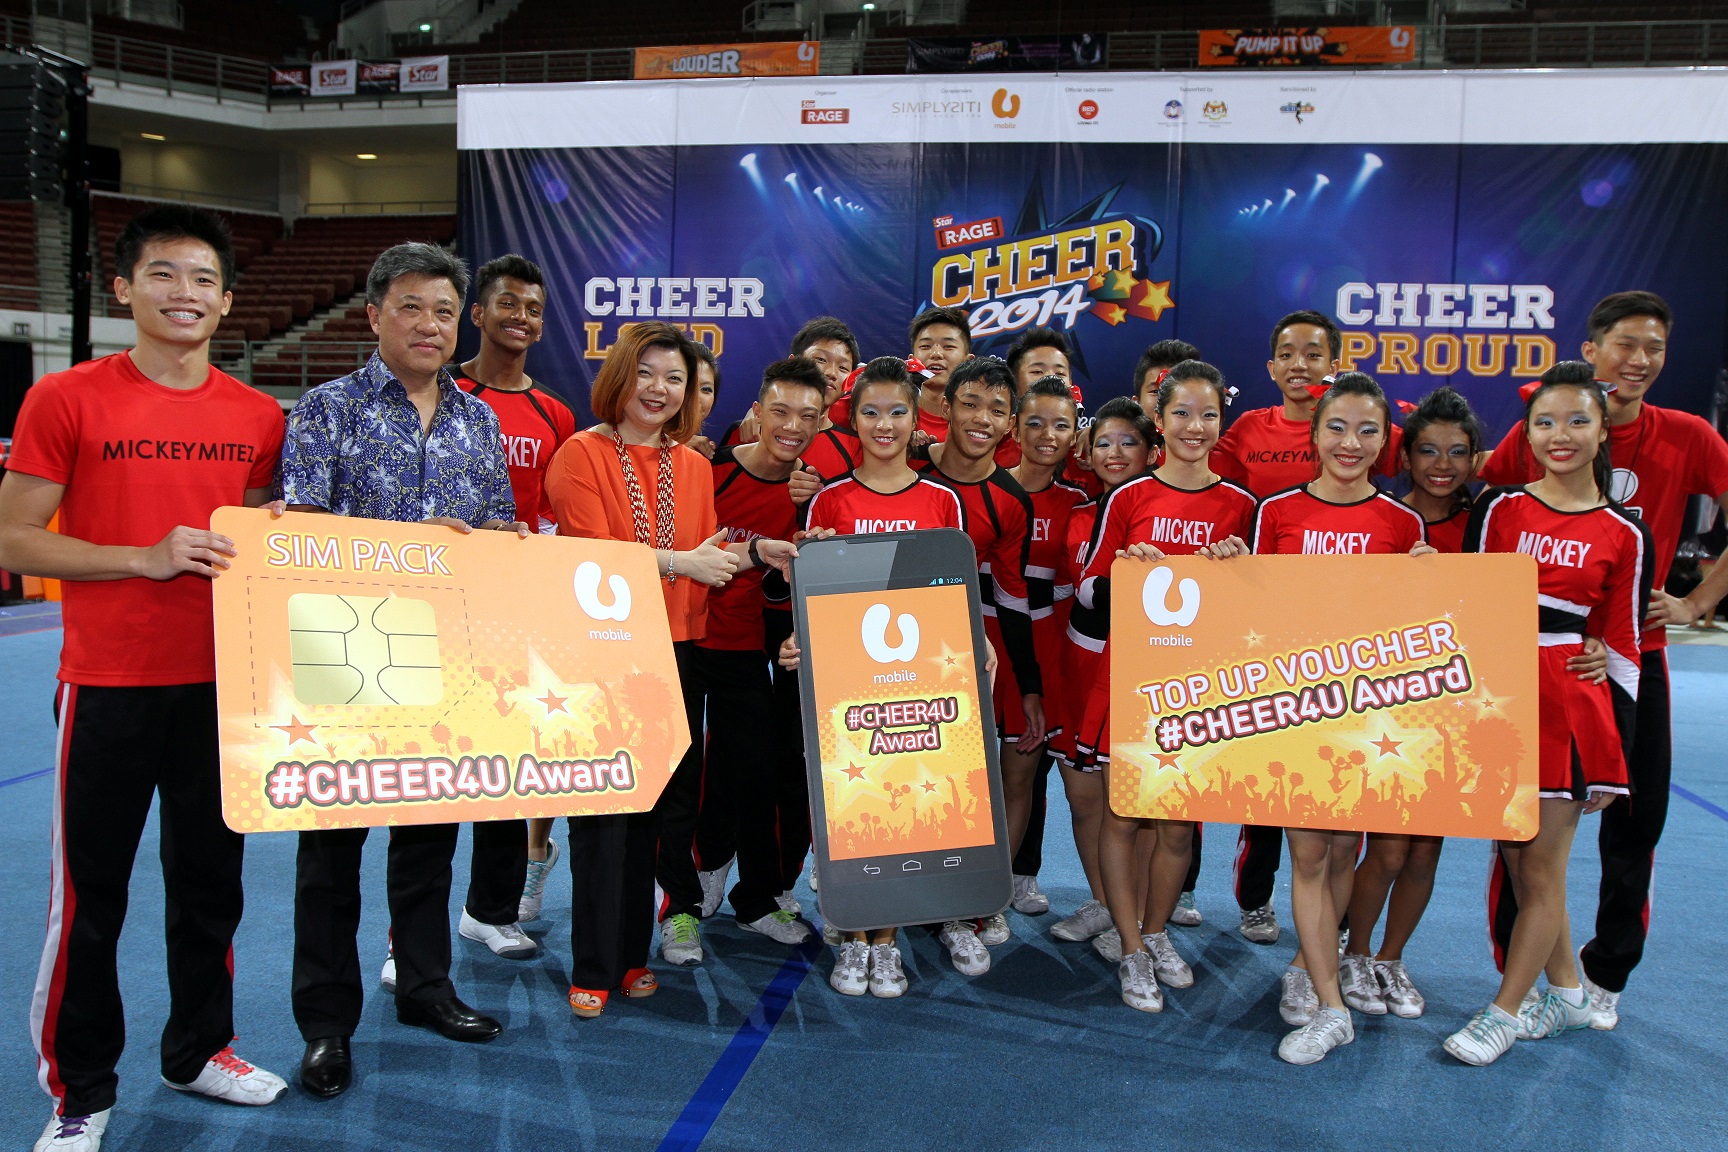 Mickeymitez from SMK Damansara Jaya was crowned winner of the inaugural #CHEER4U award by u mobile. There to present the award were (second from left) Star publications group managing director and chief executive officer datuk Seri Wong Chun Wai and (fourth from left) u mobile chief marketing officer, Jasmine Lee. 